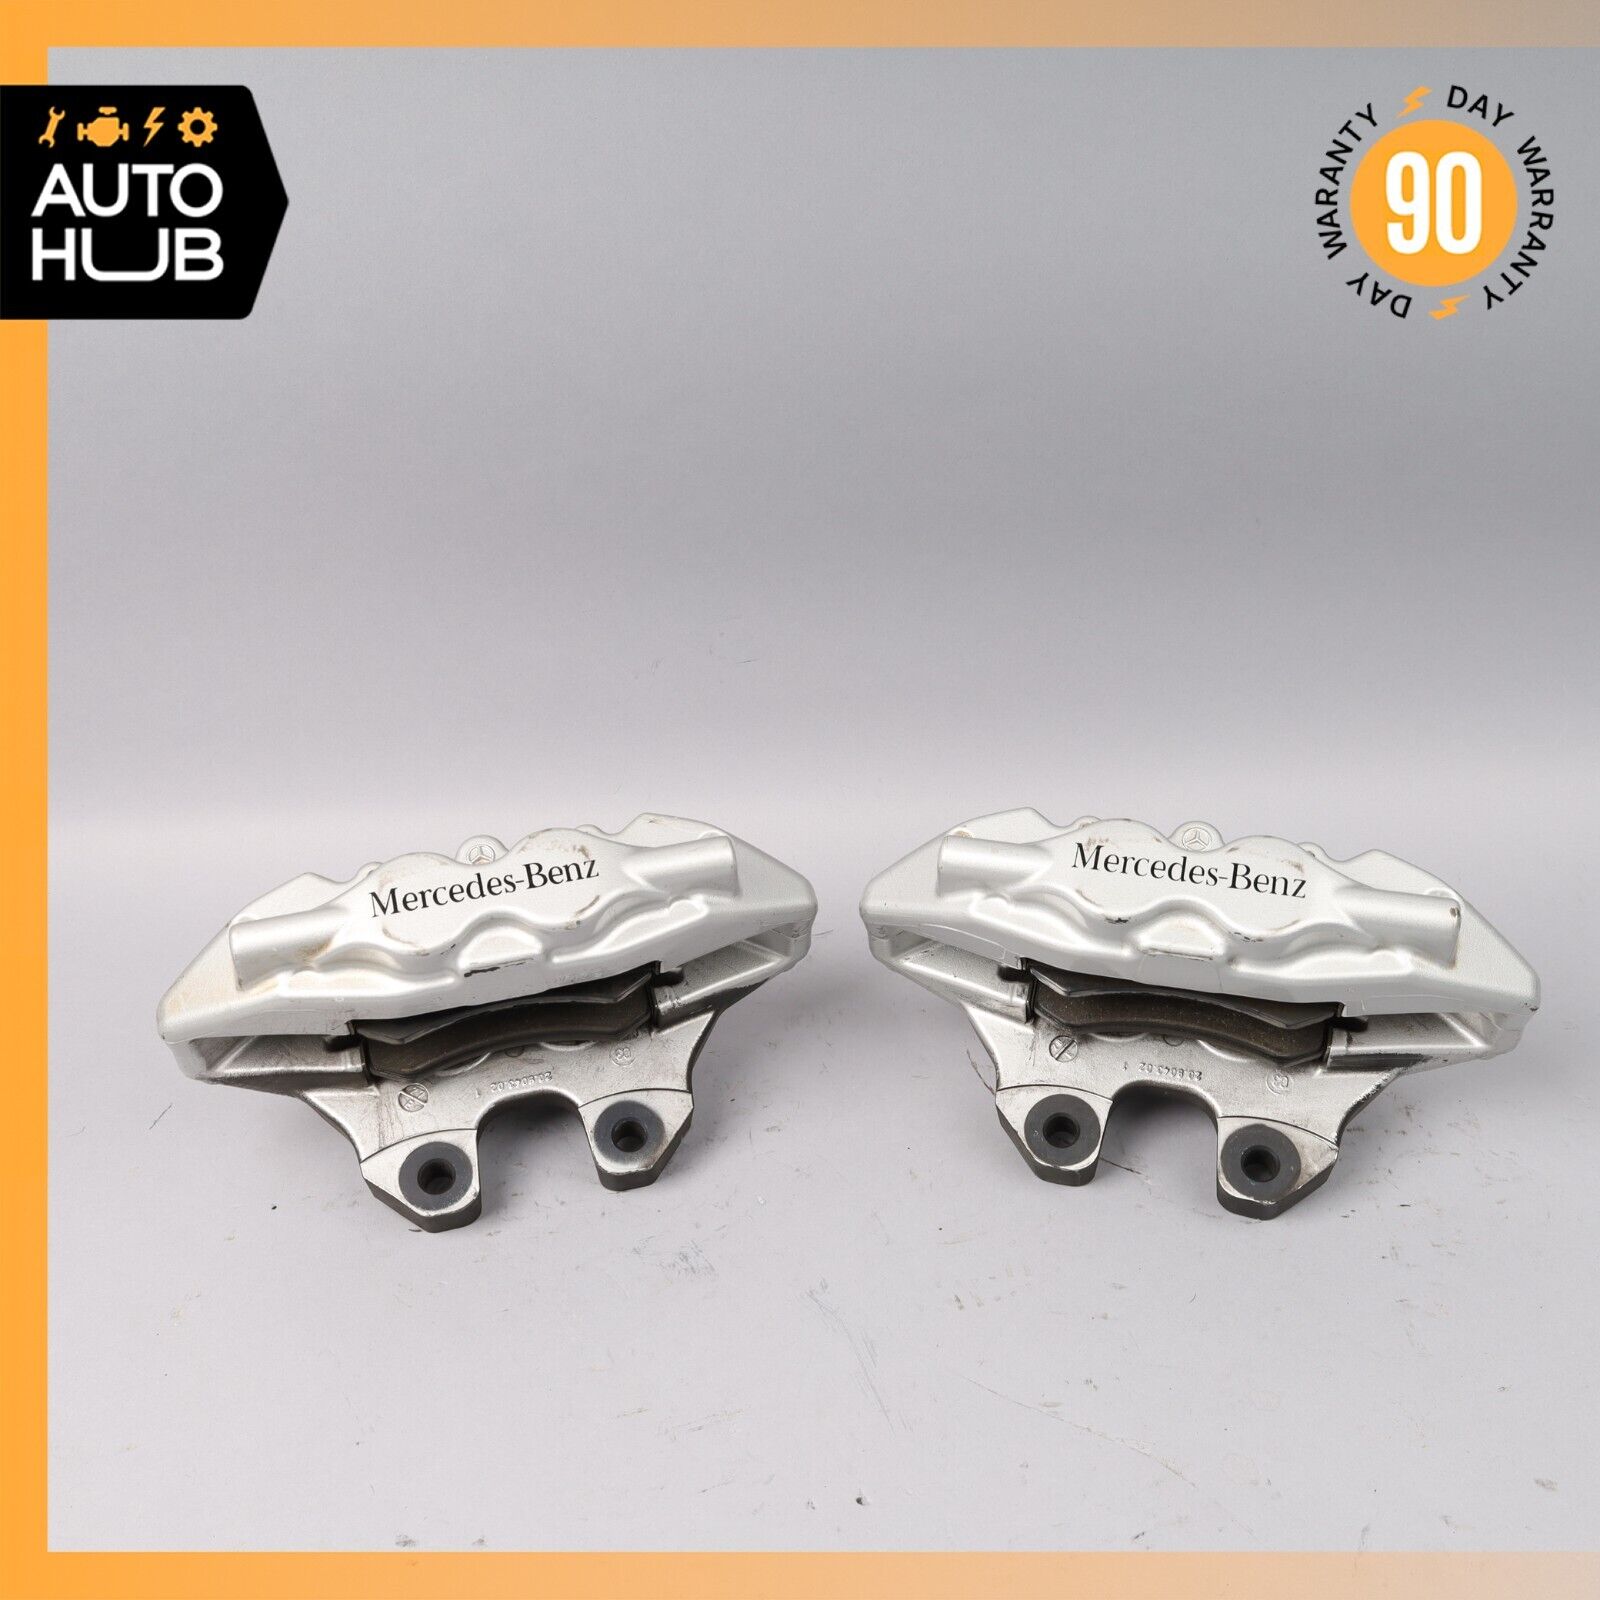 03-06 Mercedes W220 S600 CL55 AMG Rear Left & Right Brake Calipers Set OEM